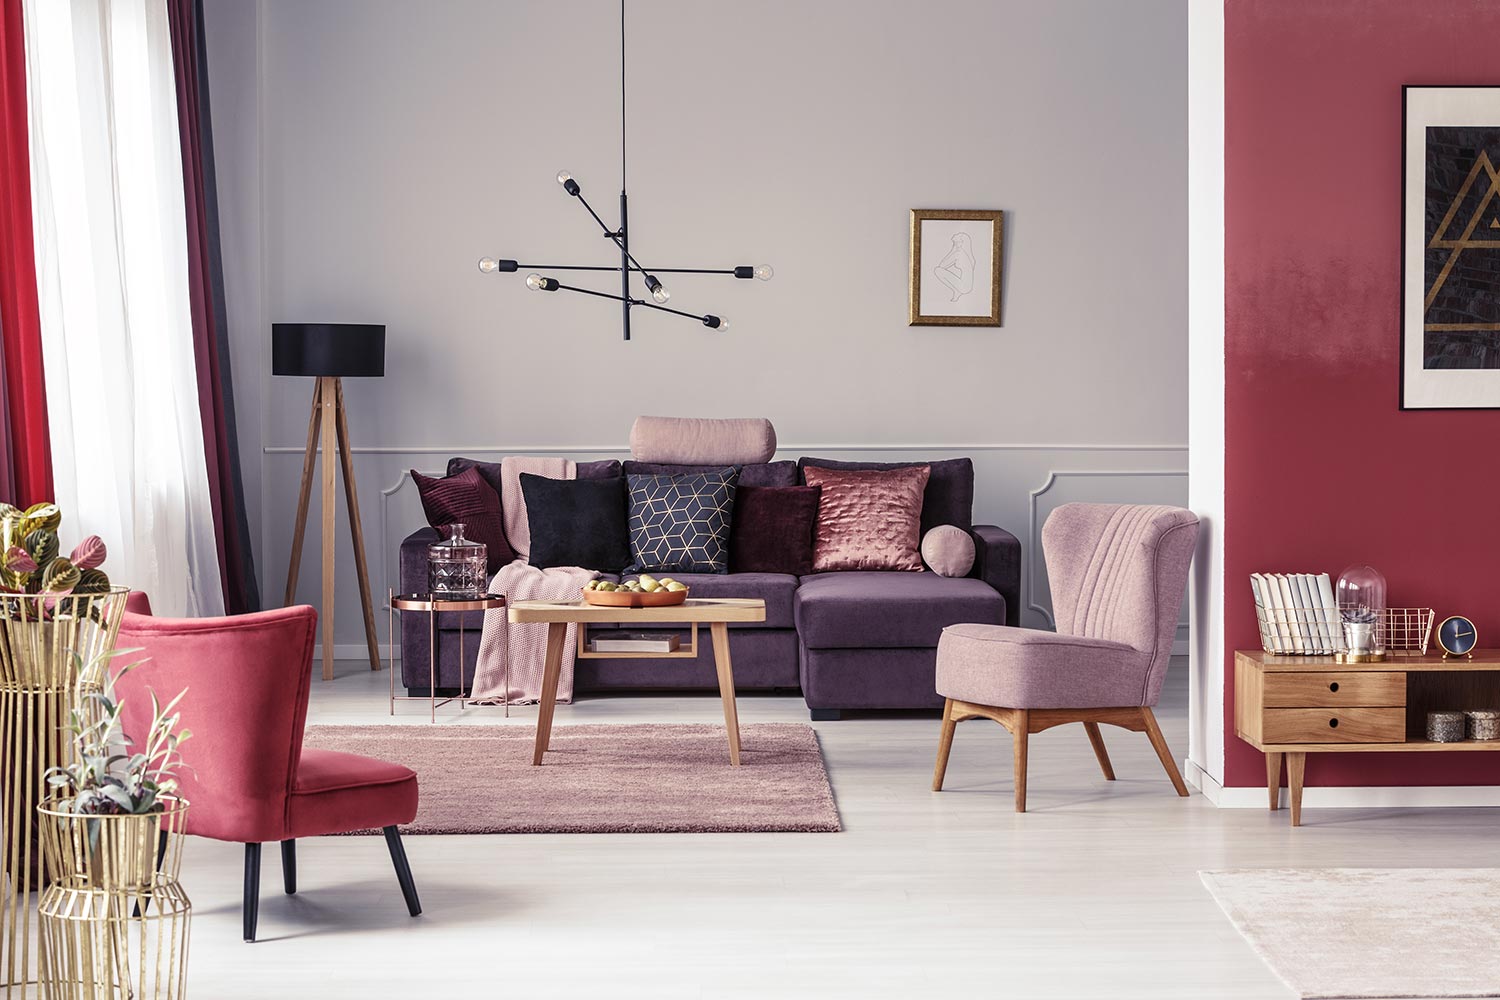 Pink and red armchair in warm living room